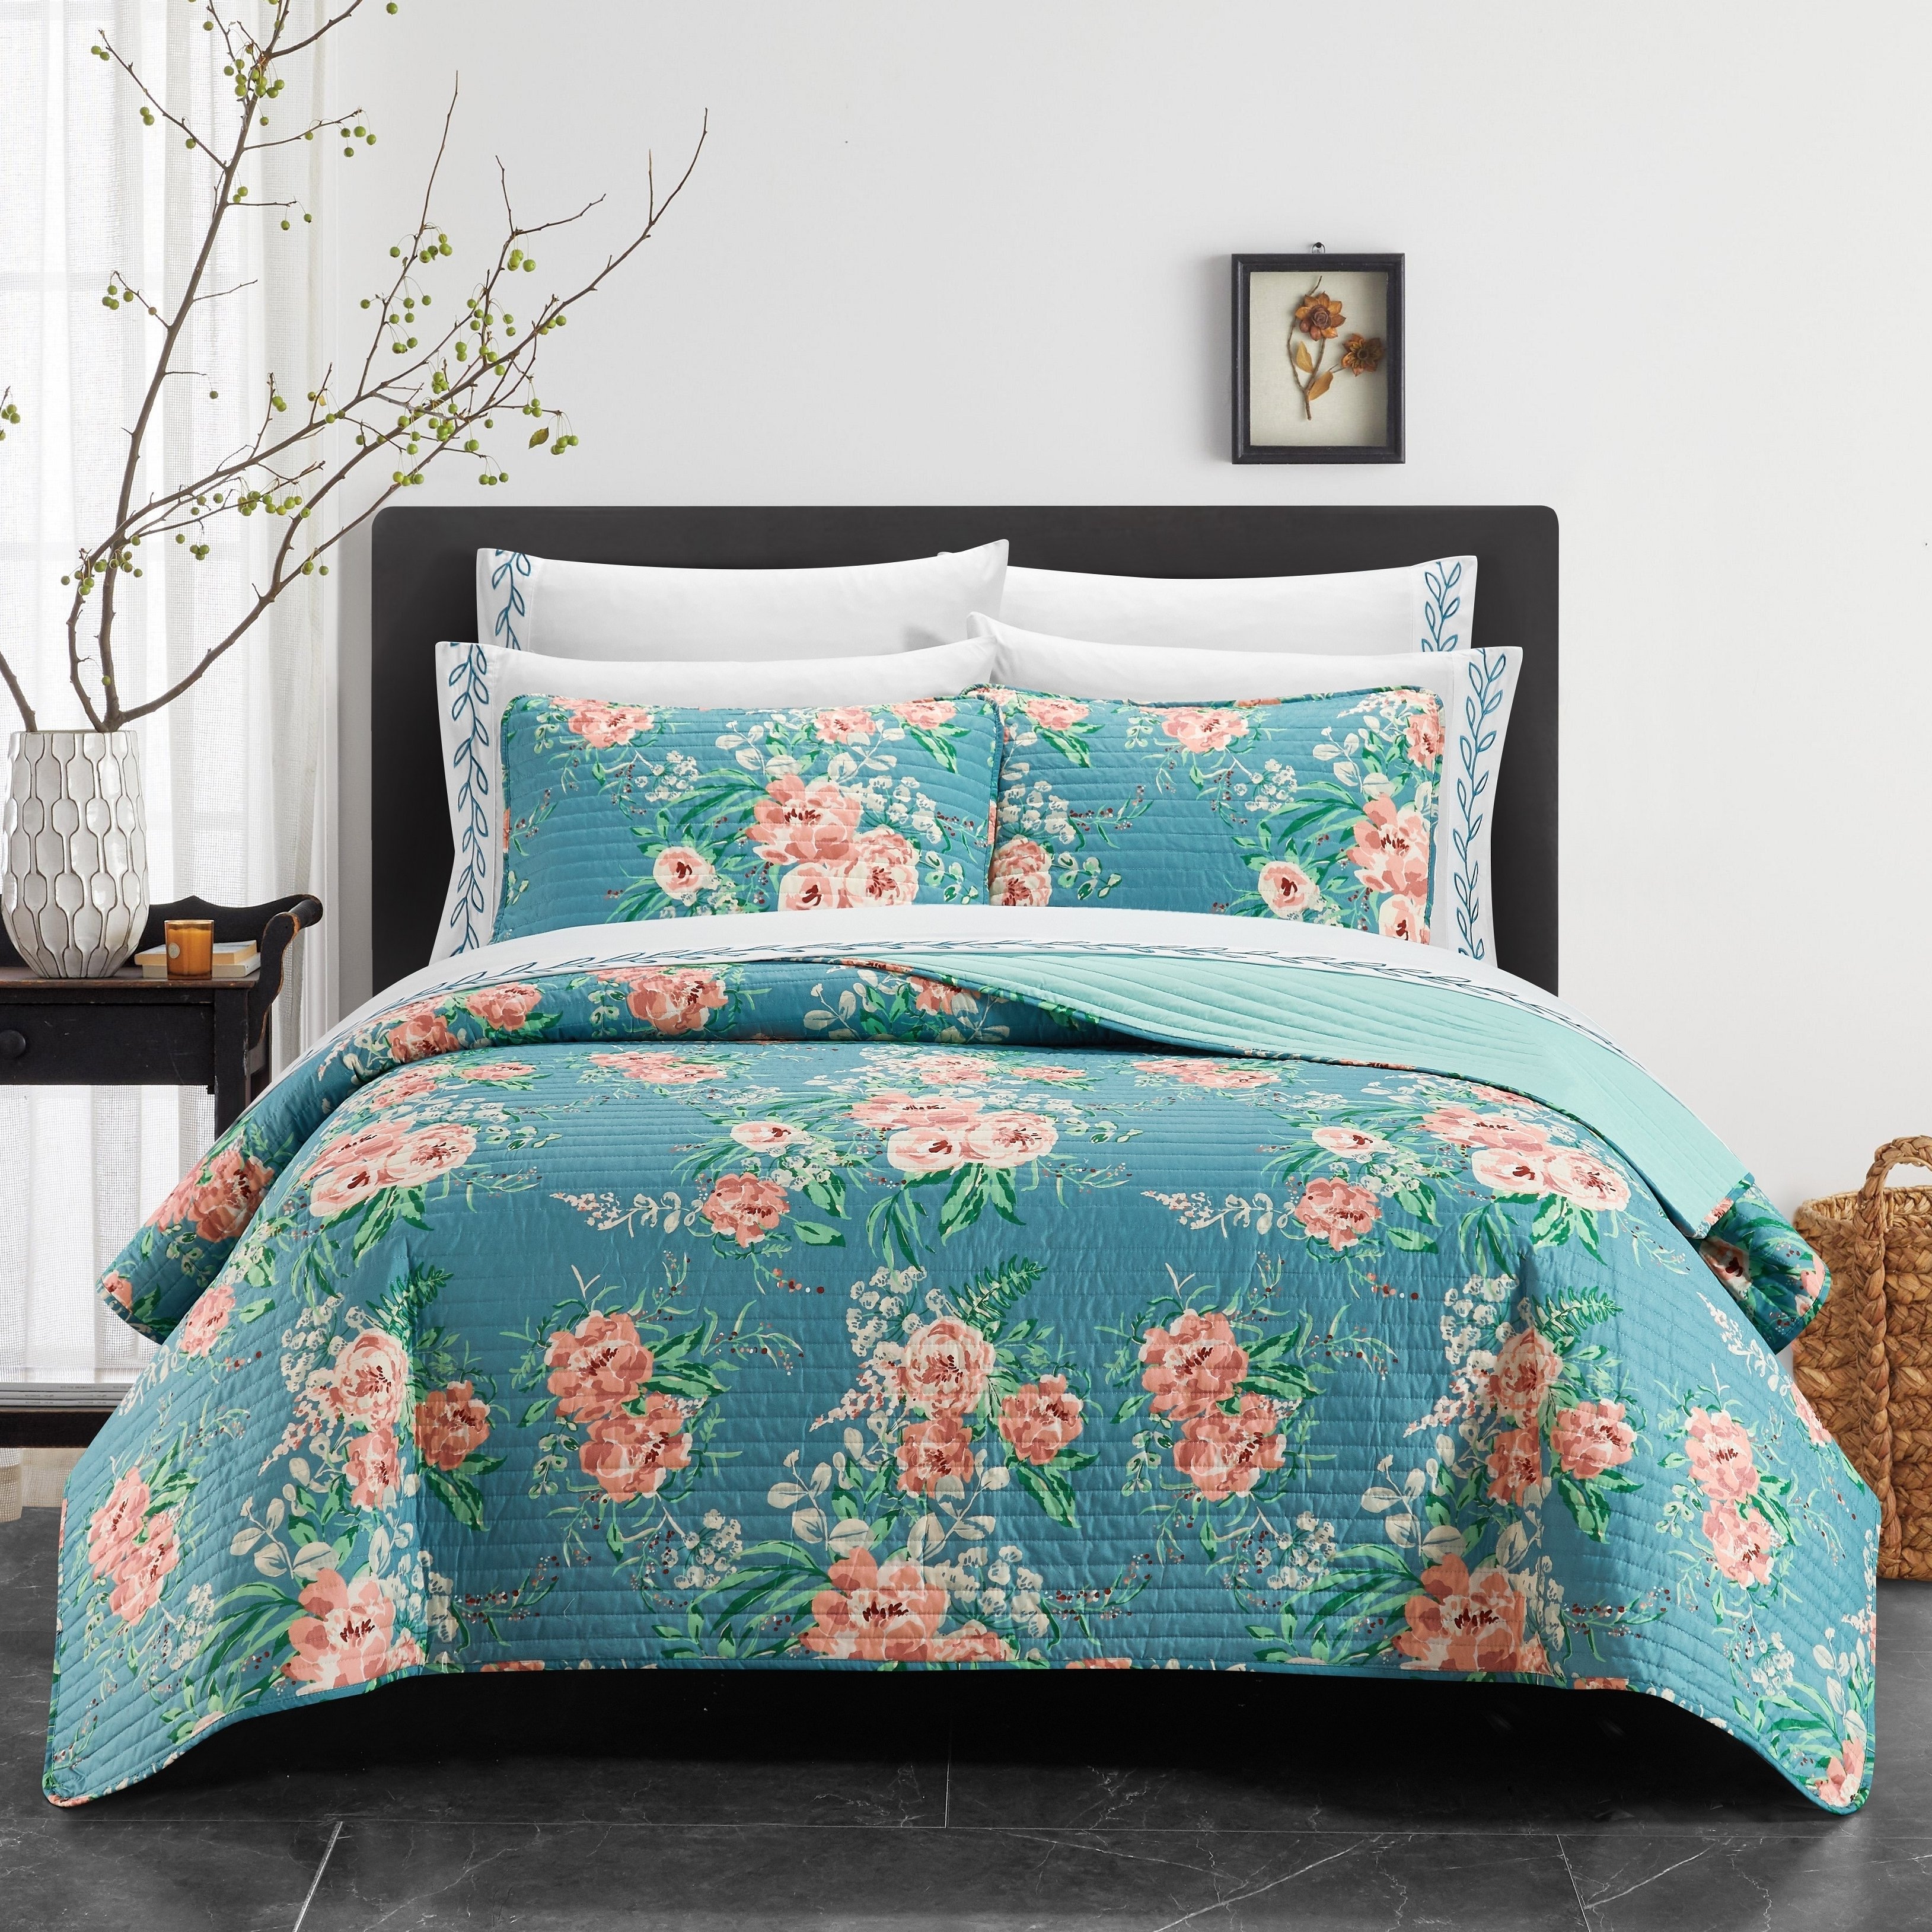 Palm Spring 9 Or 6 Piece Quilt Set Watercolor Floral Pattern Print Bed In A Bag - Aqua, California King